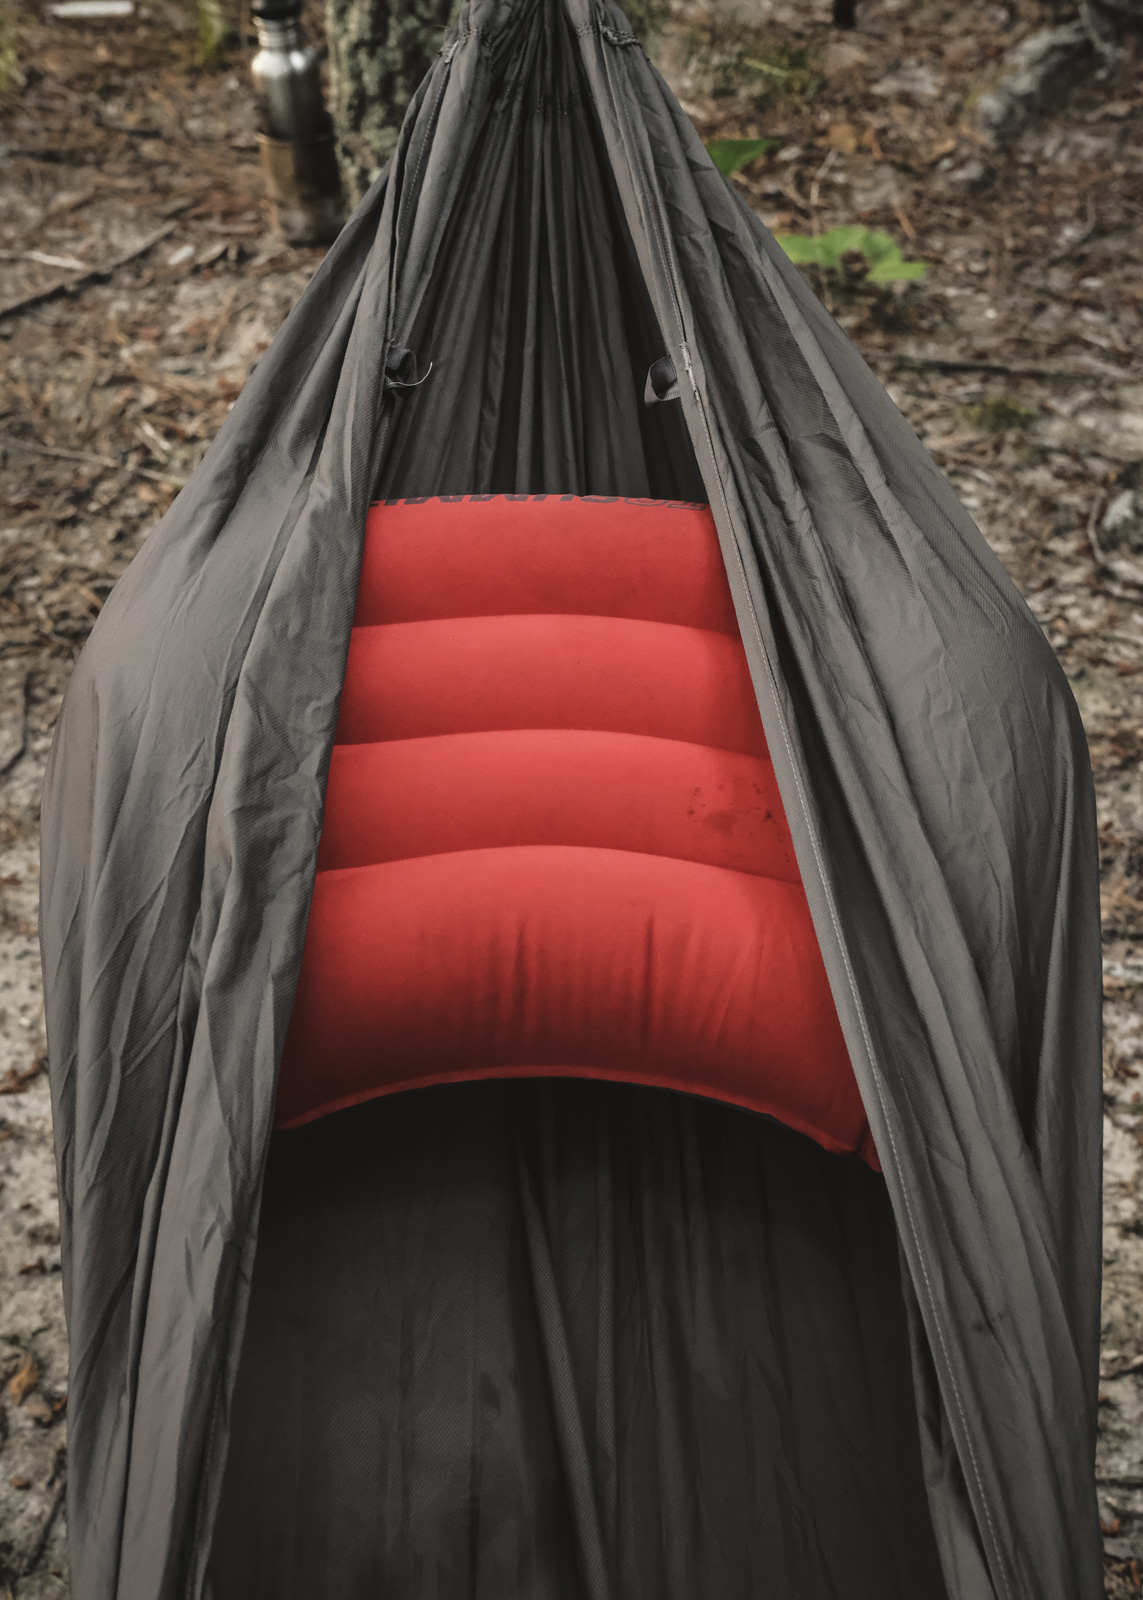 Sea To Summit Aeros Pillow Ultralight Review